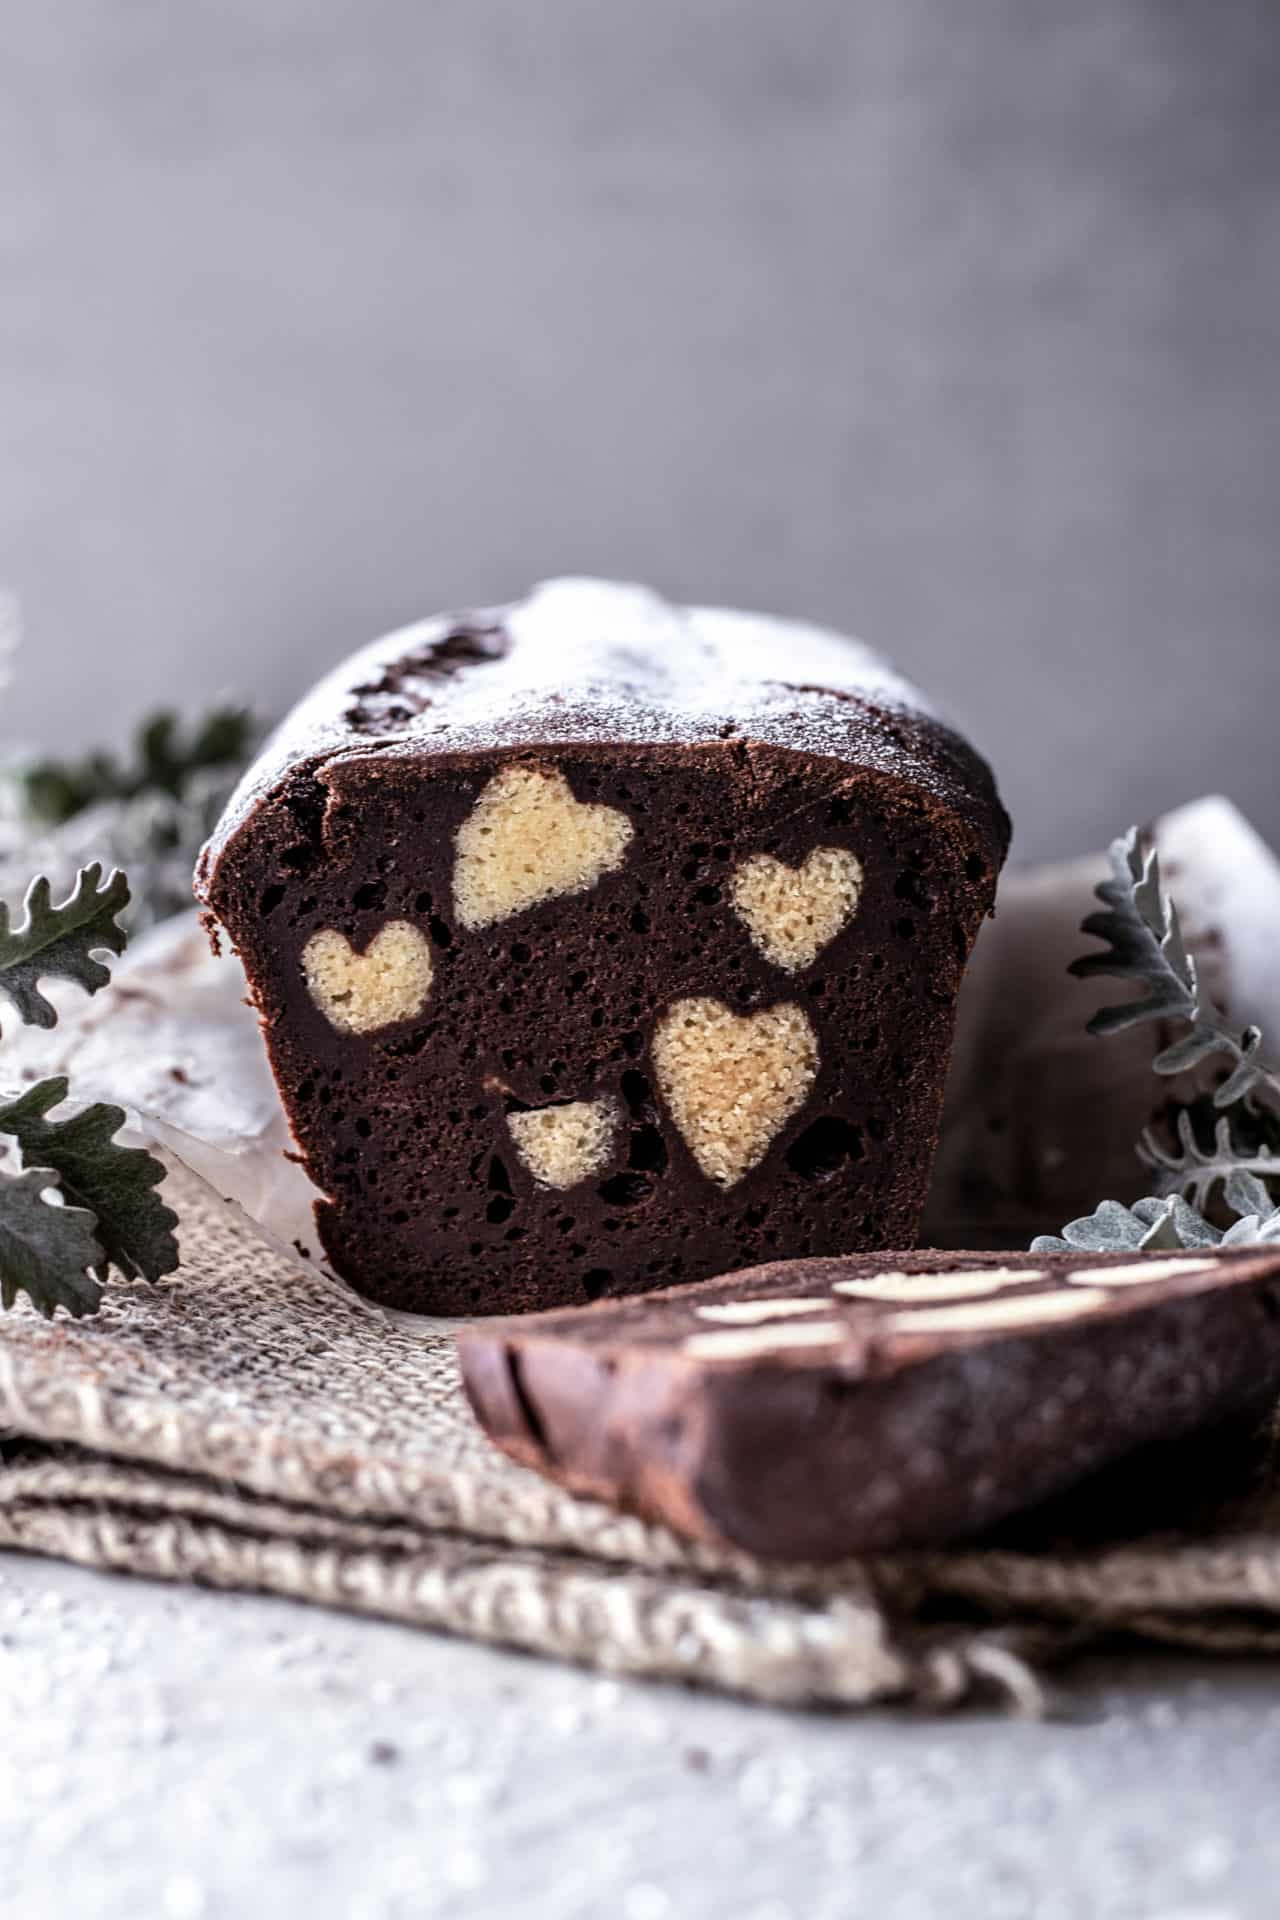 This Hidden Heart Cake is chocolate & vanilla flavoured, light, tender, buttery, perfectly sweetened and so delicious!